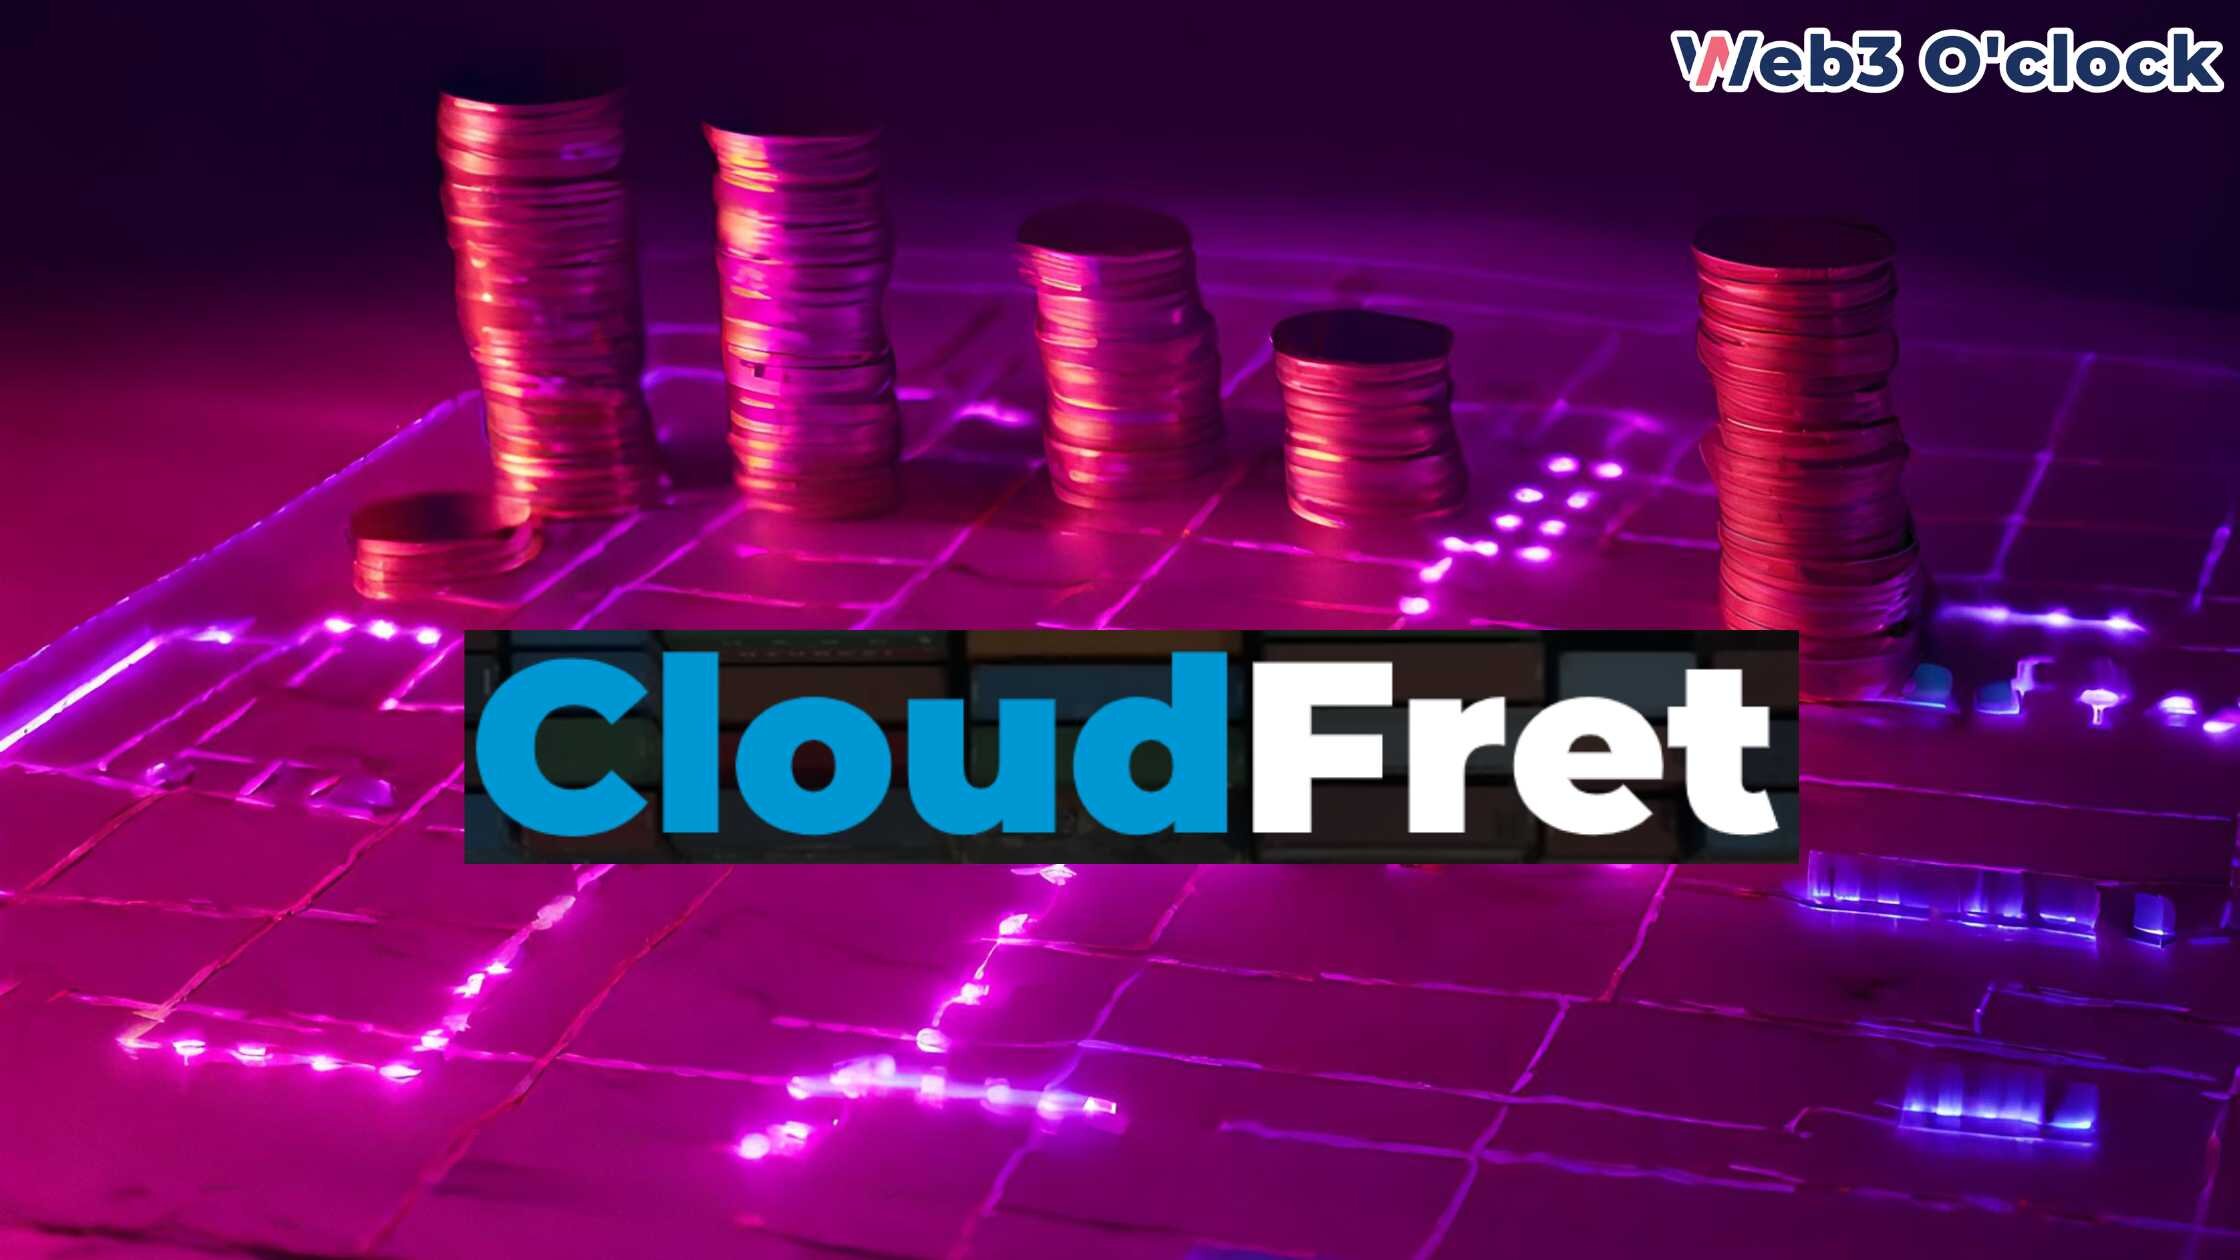 CloudFret Secures $2 Million in Funding by Web3O'clock